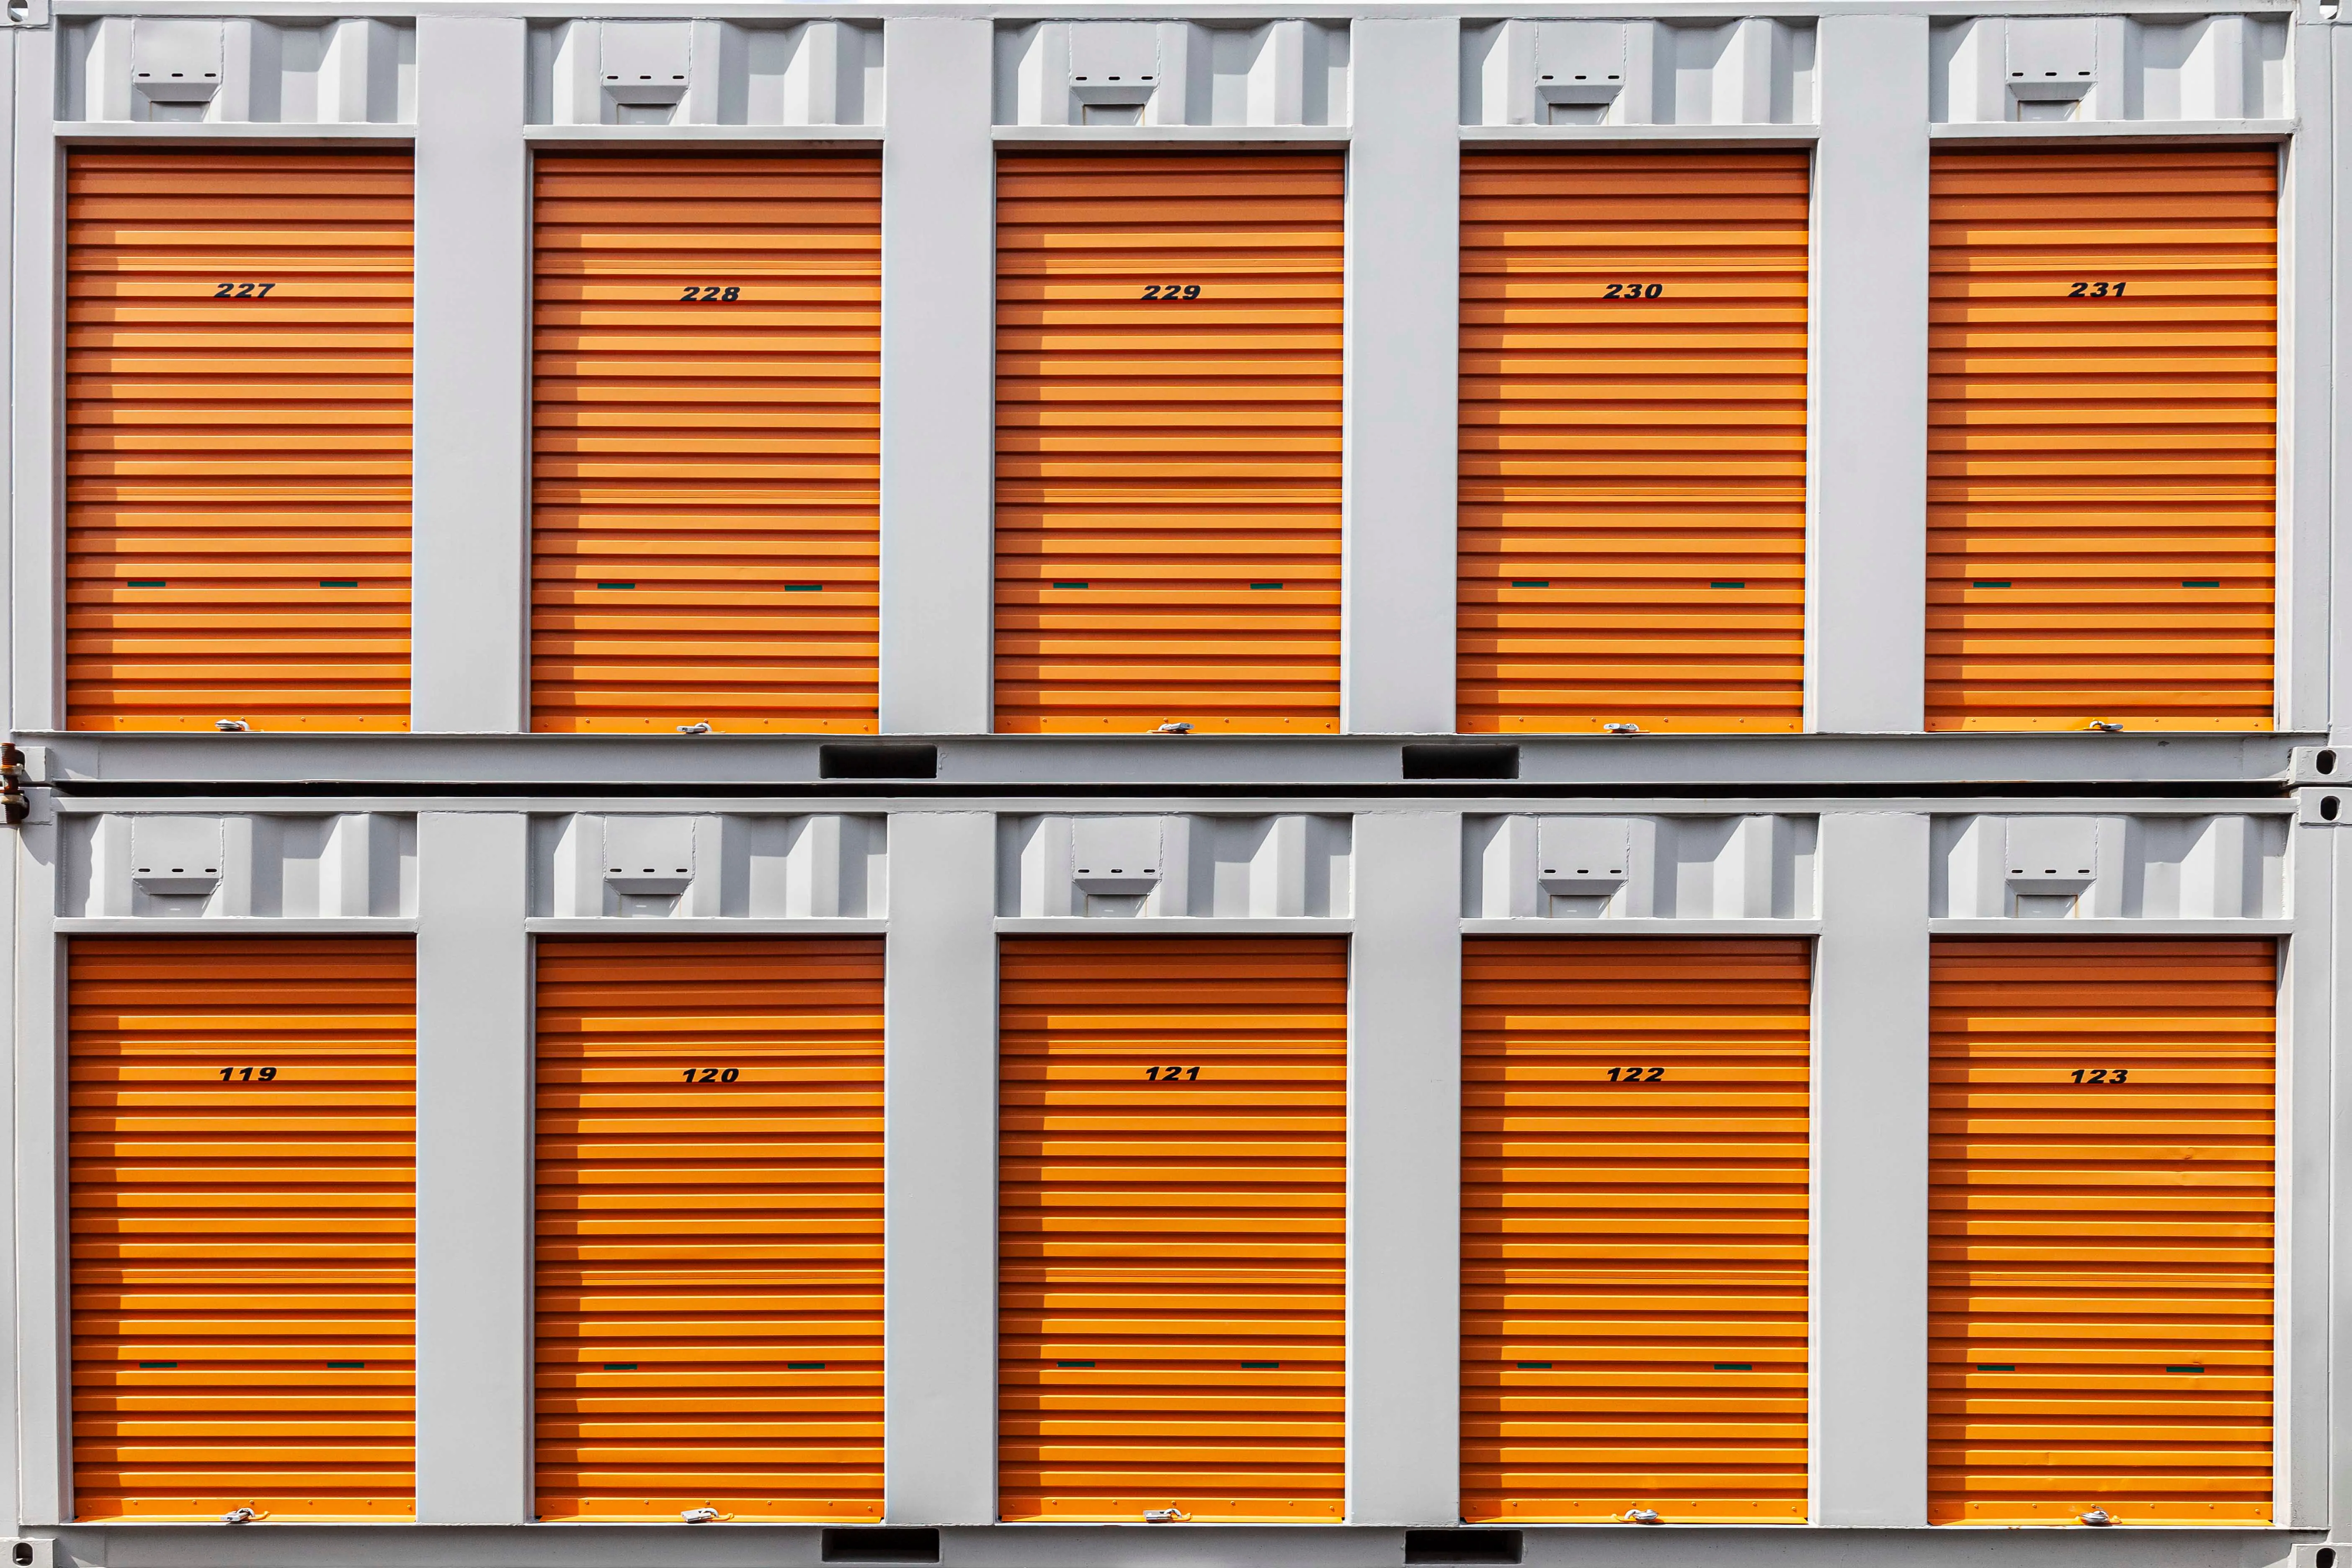 Reasons You Should Consider Renting A Storage Unit This Year